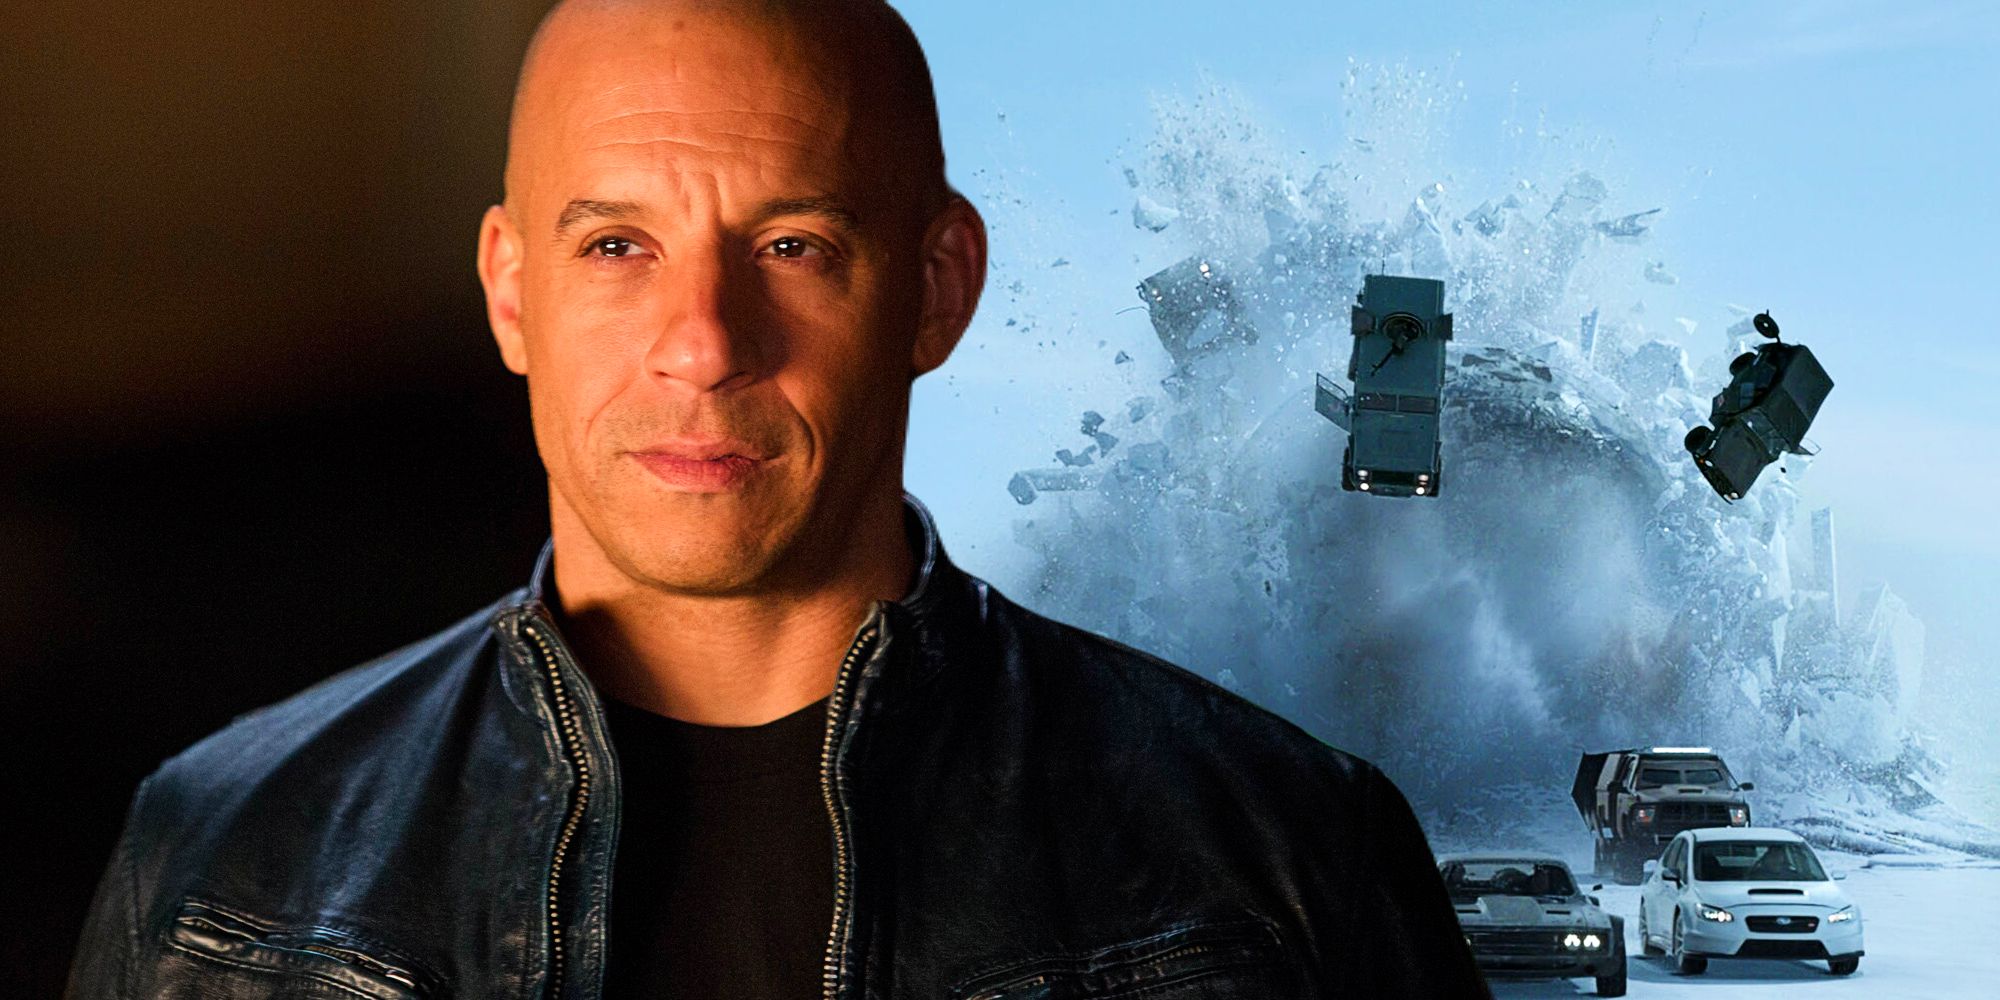 Dominic Toretto and a scene from The Fate of the Furious